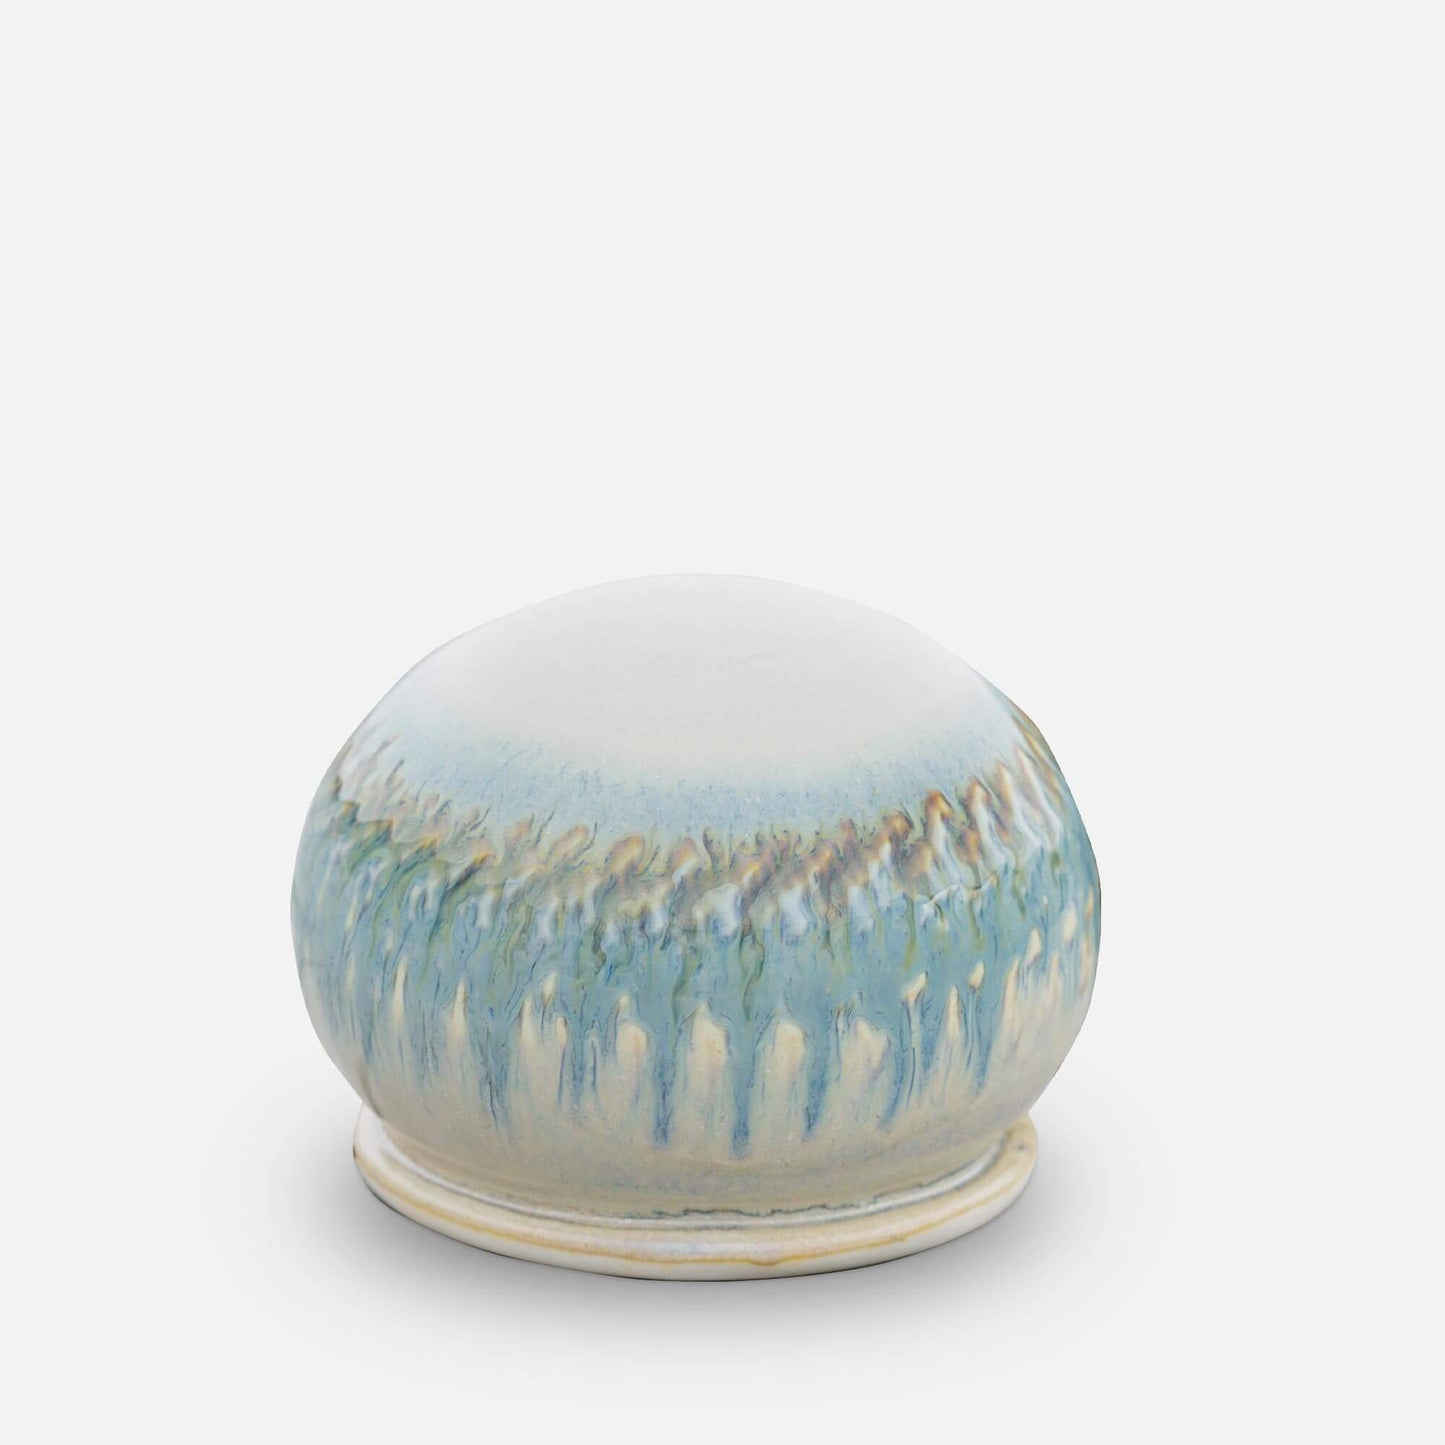 Handmade Pottery Salty Ball in Ivory and Blue Oribe pattern made by Georgetown Pottery in Maine